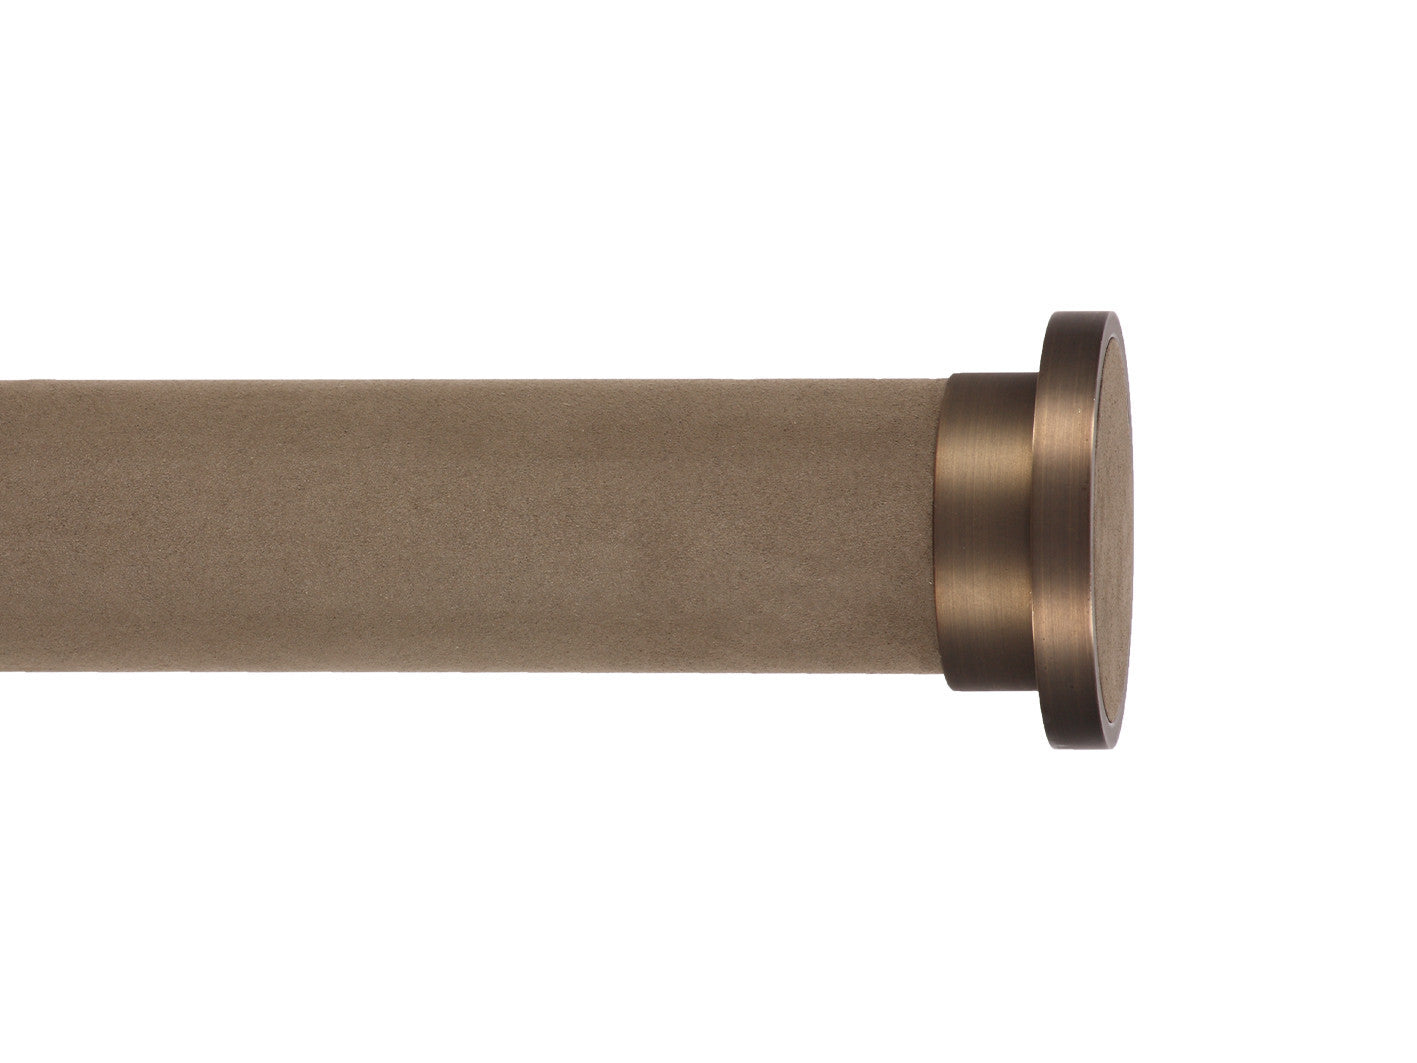 Brushed Bronze disc curtain pole finial by Walcot House